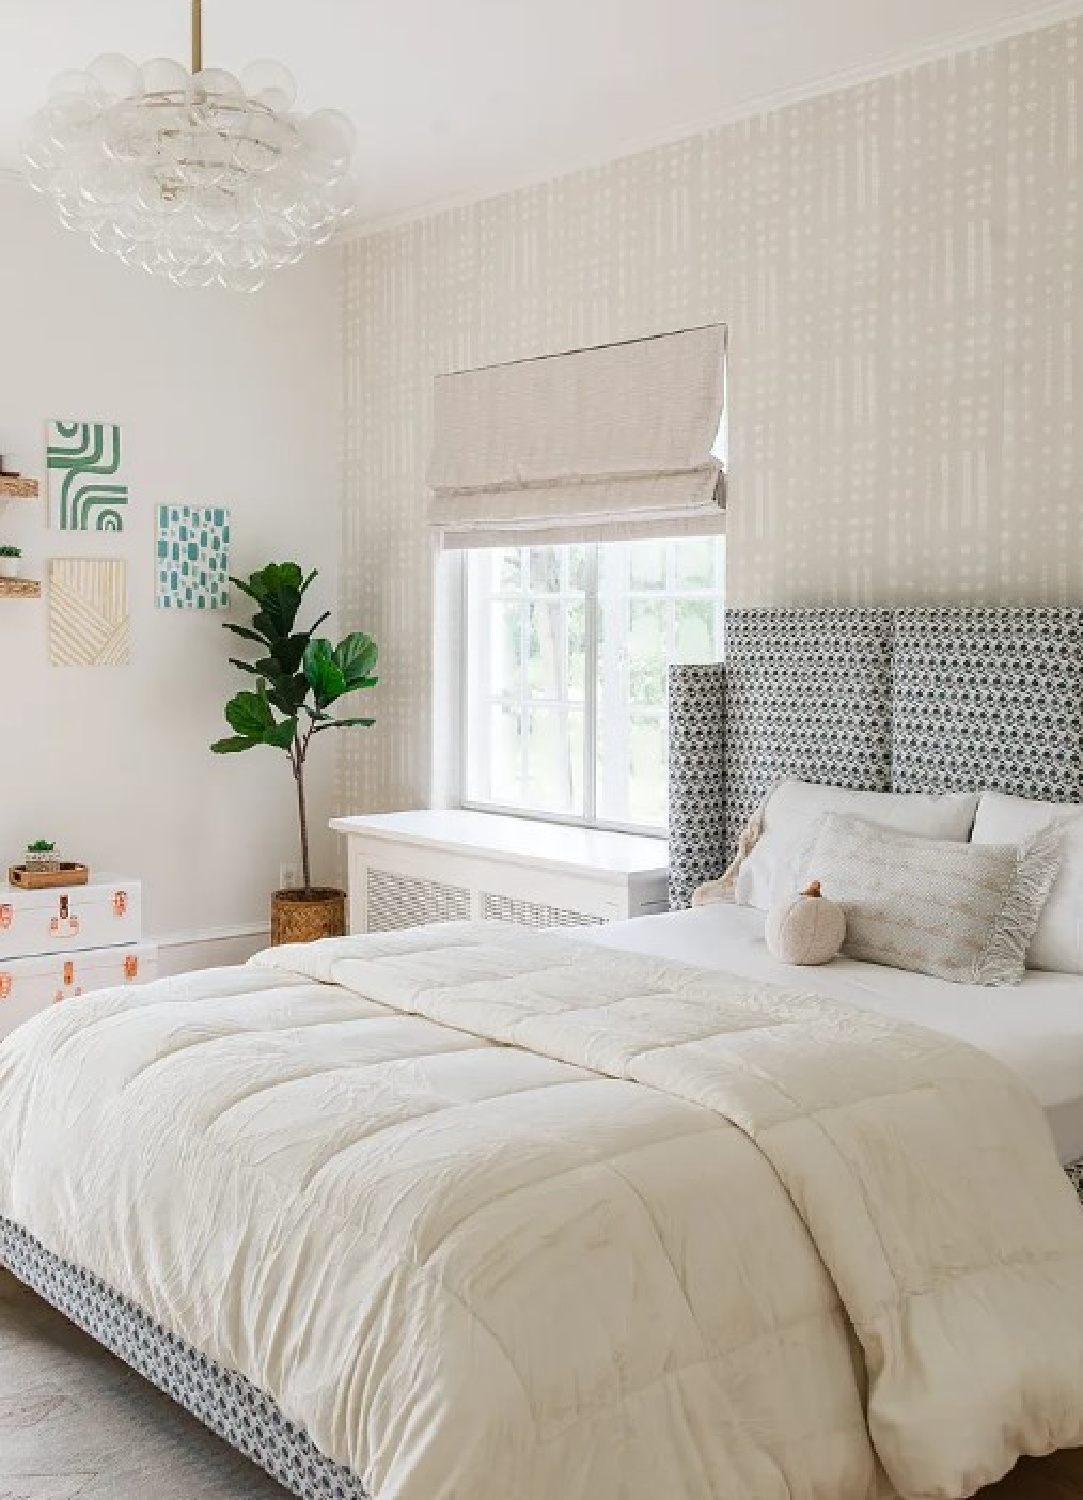 White bedroom in Kate Marker's 1920 white stucco Barrington Hills Home (160 N. Buckley Rd) with modern, serene, unfussy, timeless interiors. #katemarkerinteriors @thedawnmckennagroup #katemarkerhome